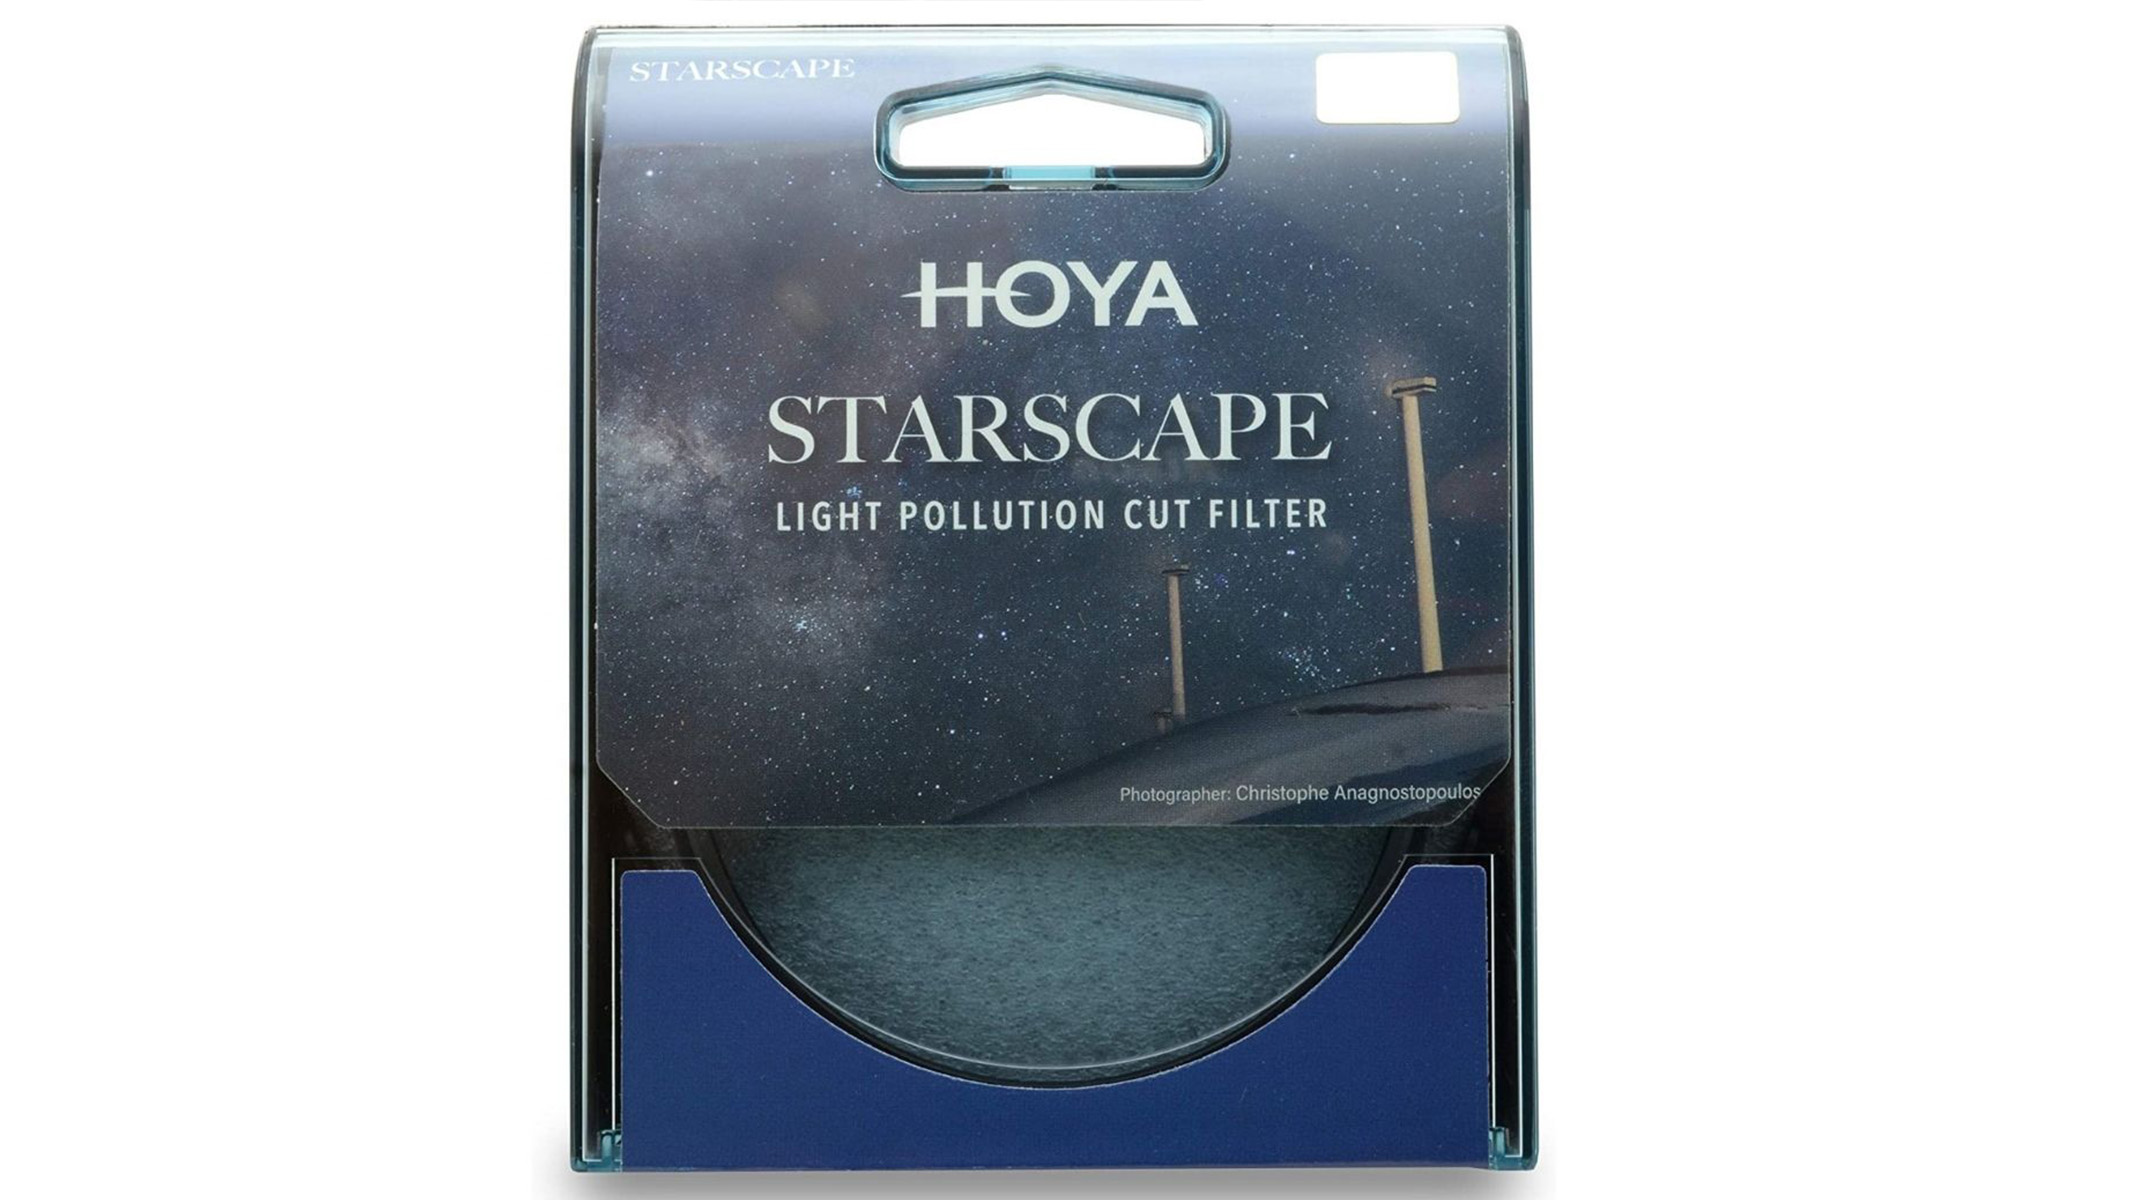 A product photo of the Hoya Starscape light pollution filter in its packaging